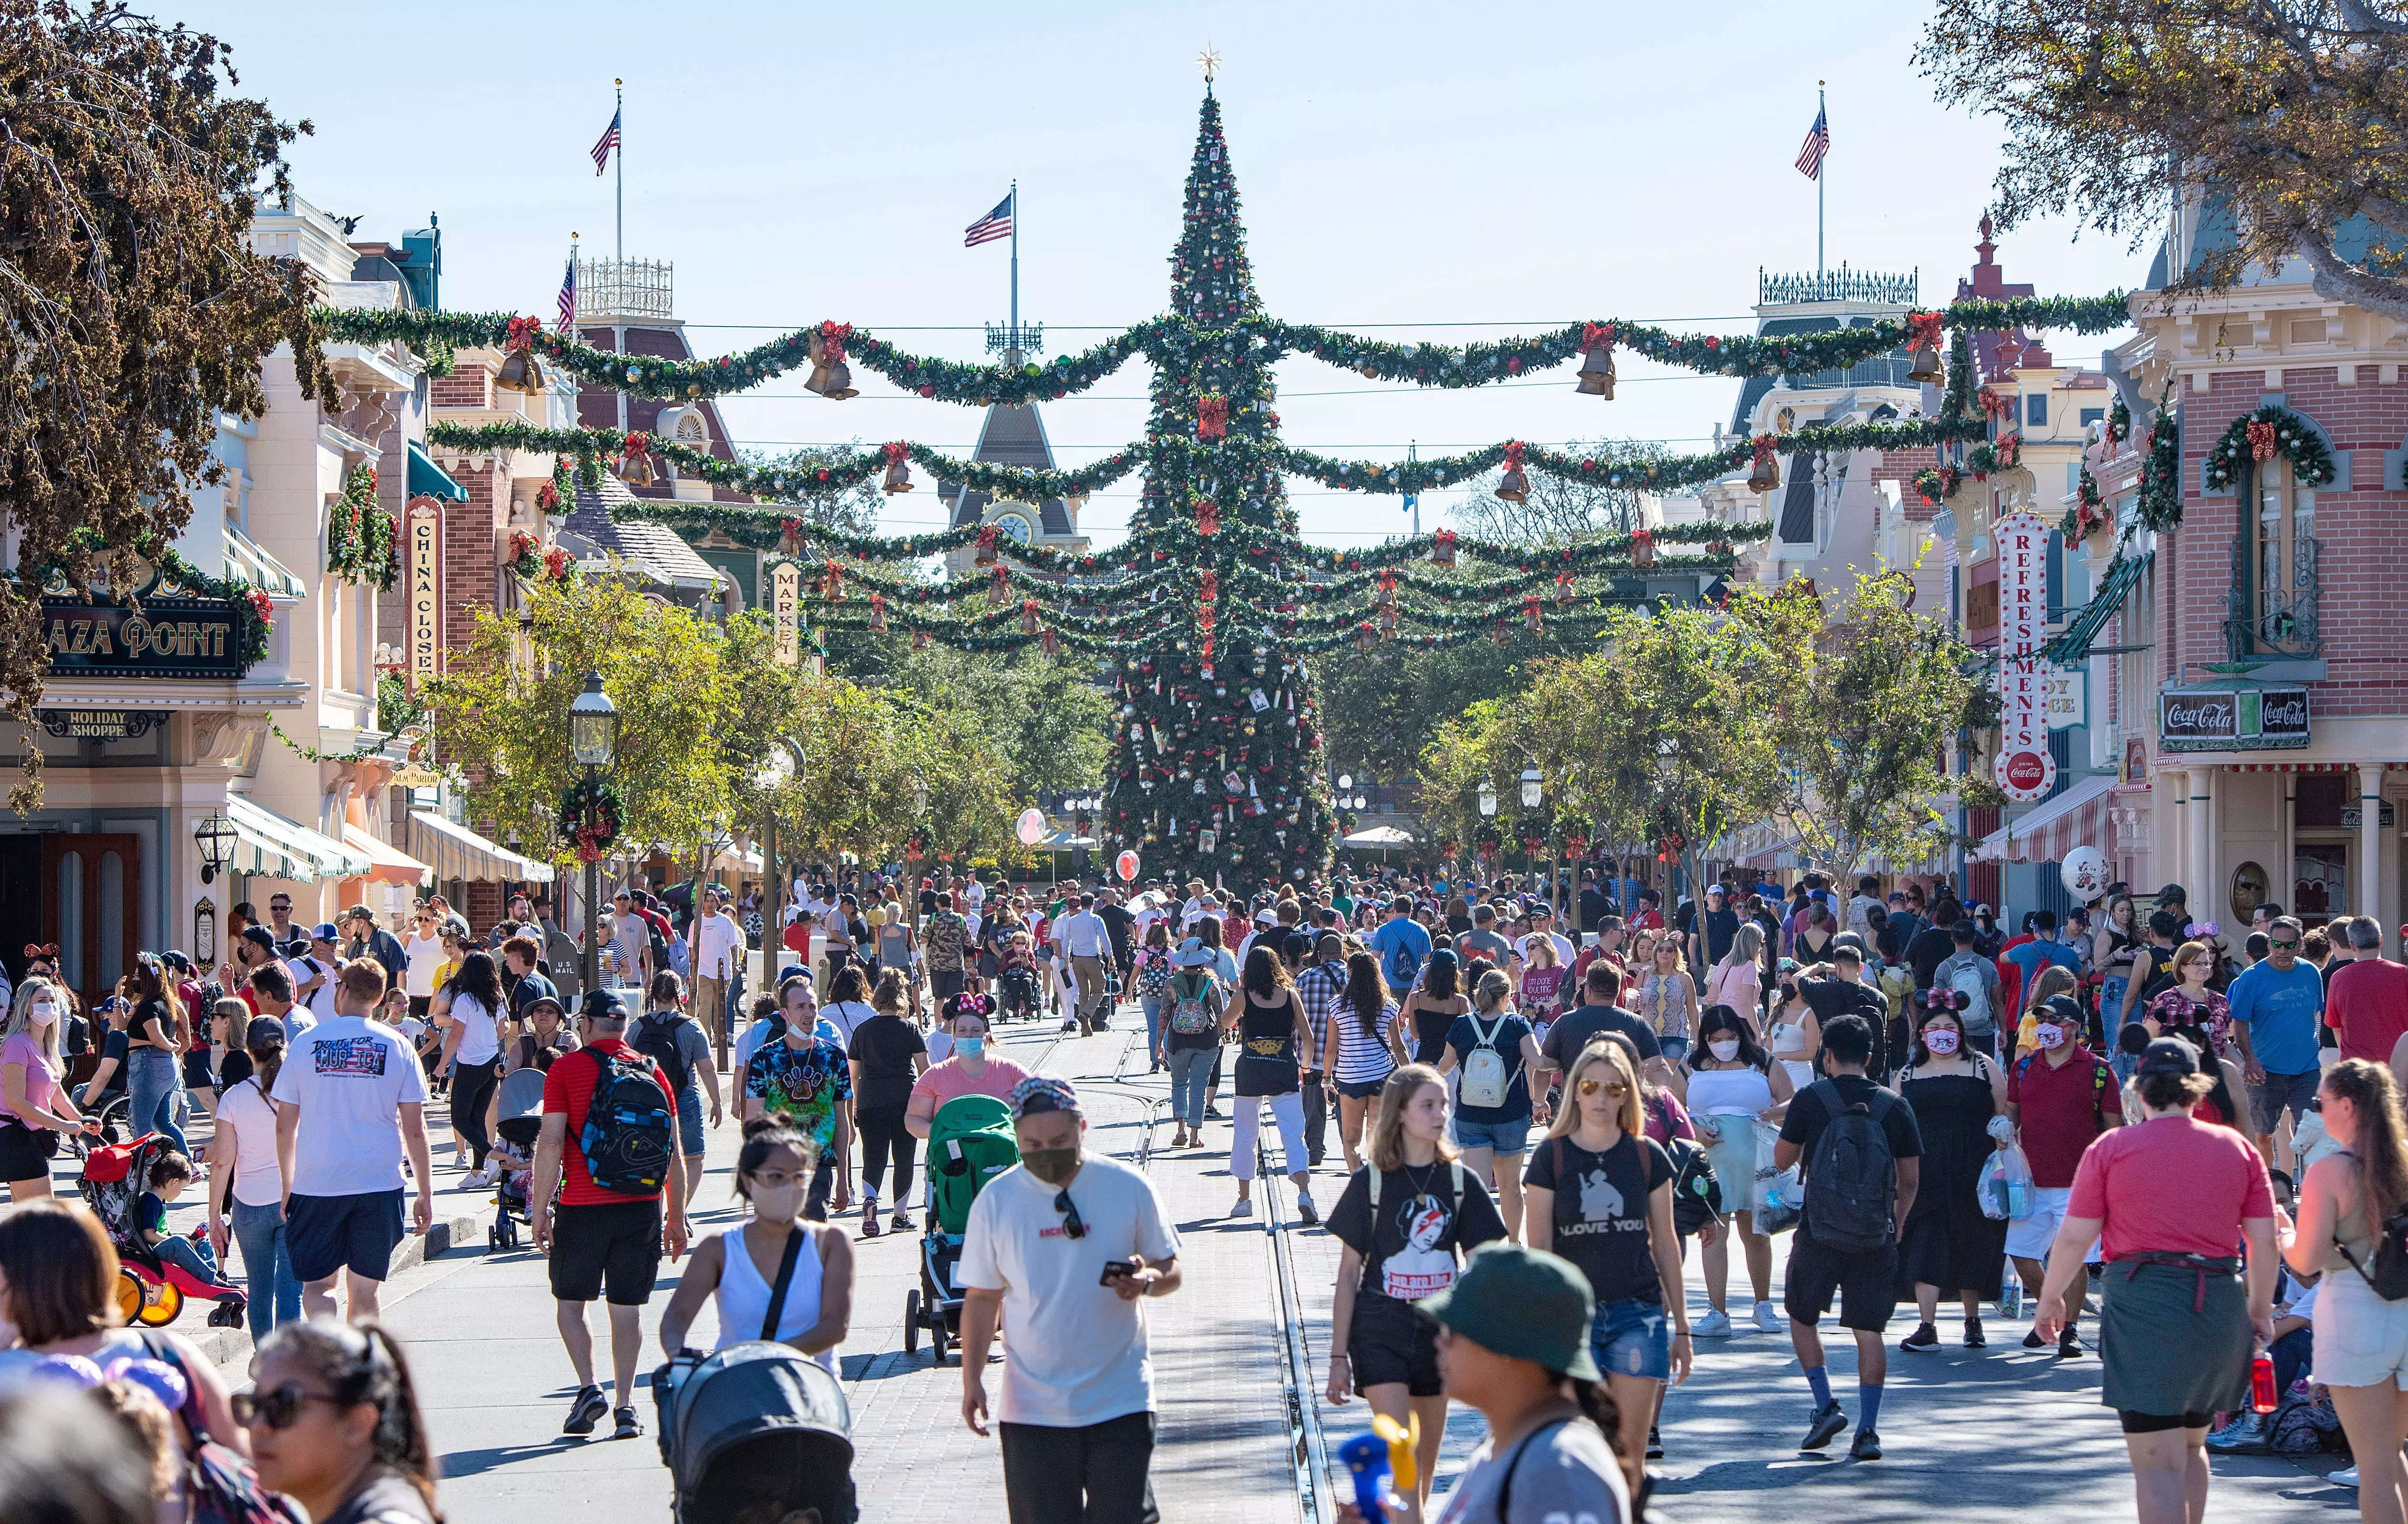 Holiday decorations hang from the buildings as a large Christmas tree towers above visitors while they make their way along Main Street USA.